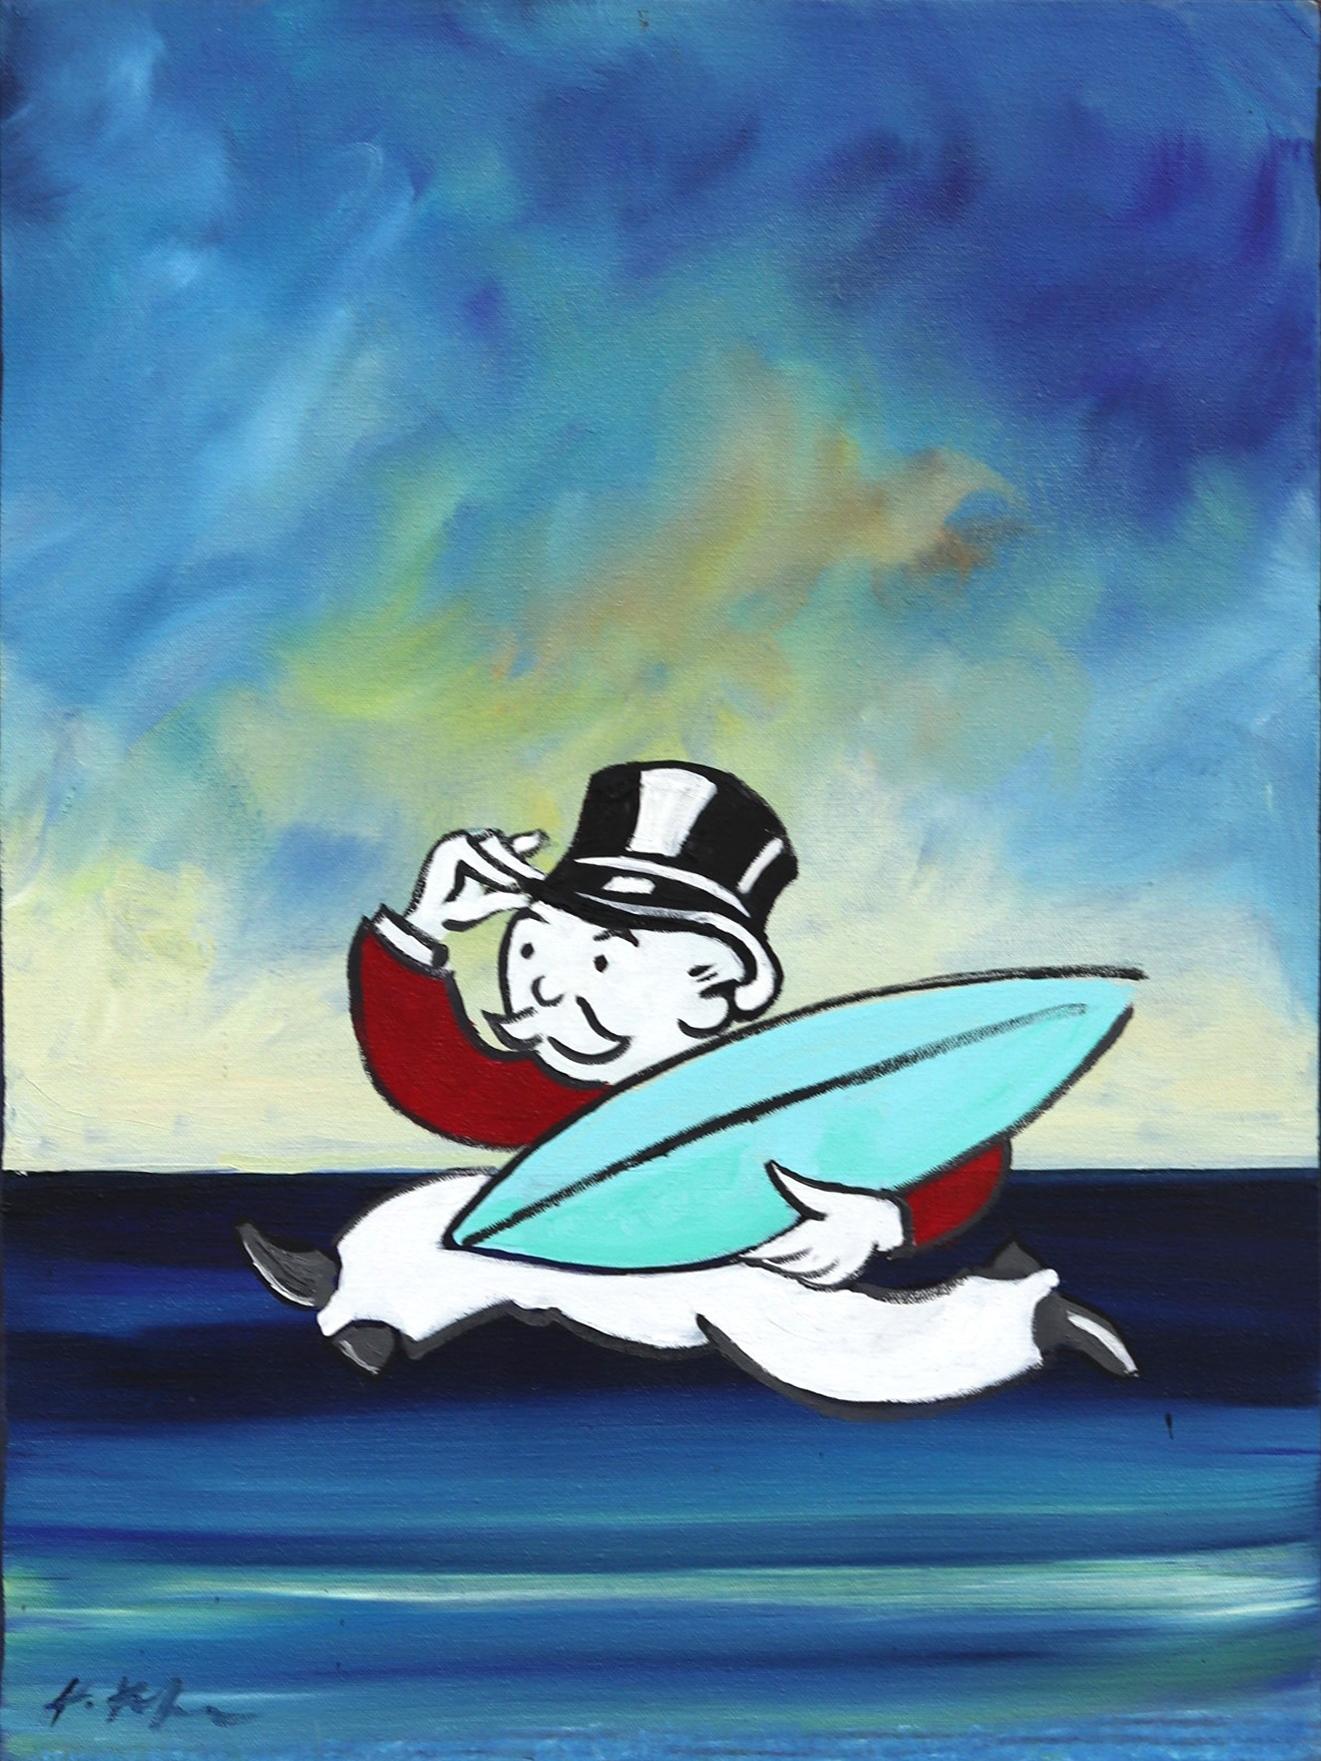 Kathleen Keifer Landscape Painting - Let's Go Surfing Uncle Pennybags!